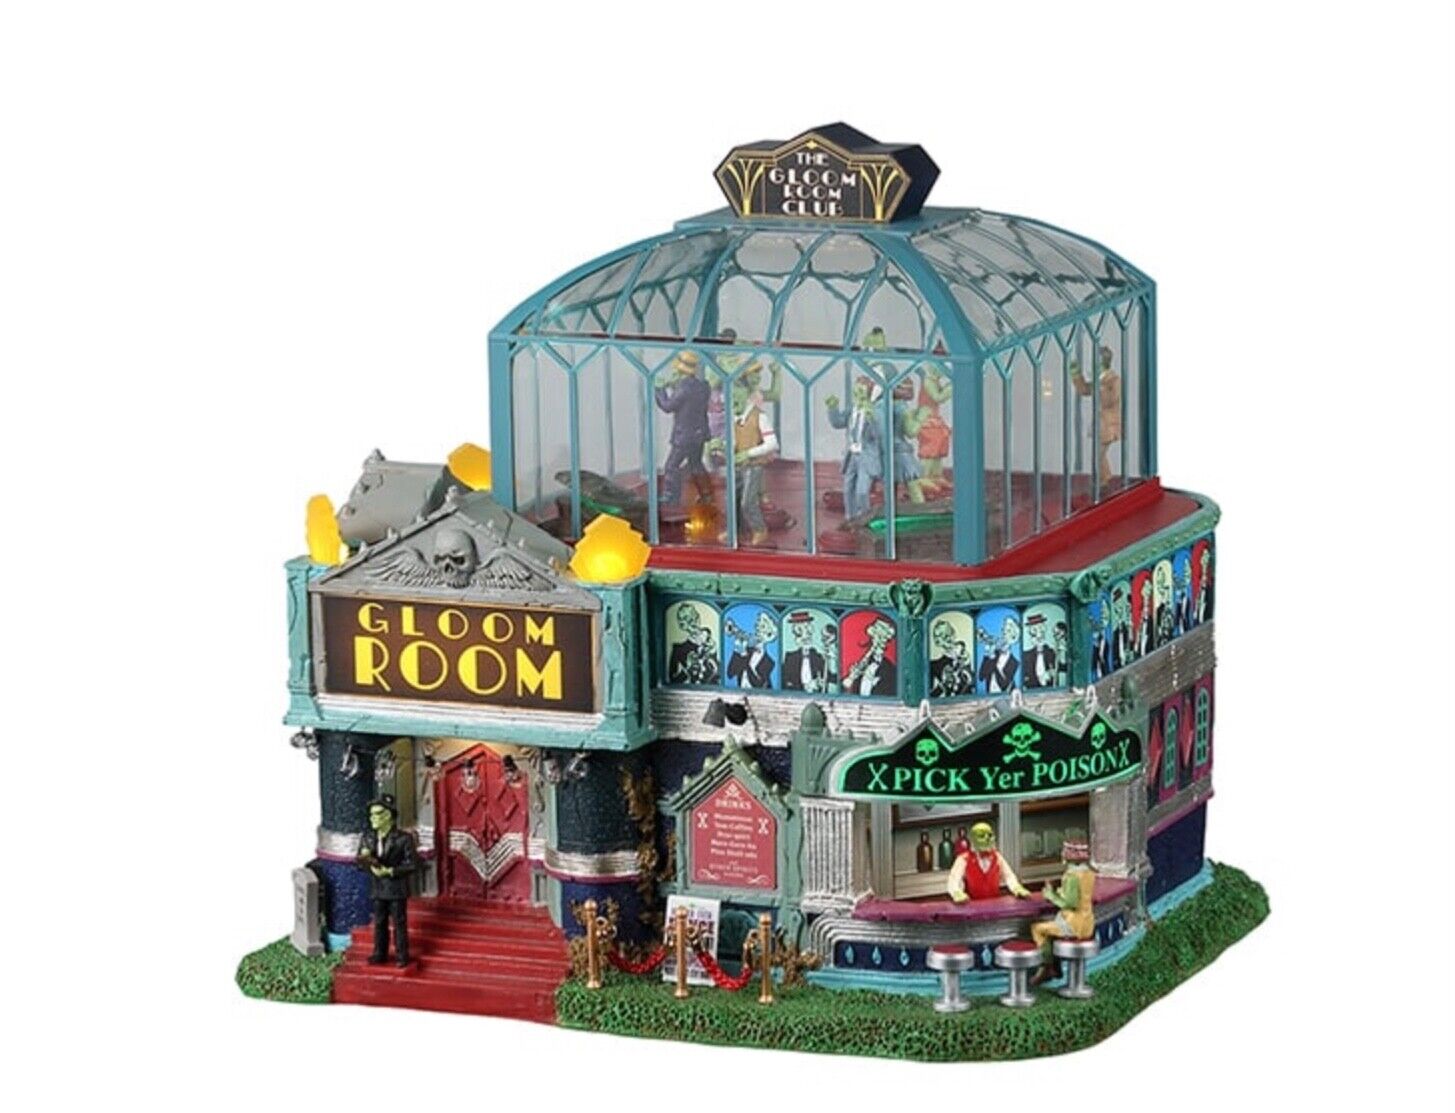 Lemax The Gloom Room Spooky Town Halloween Village Animated Sound LED's